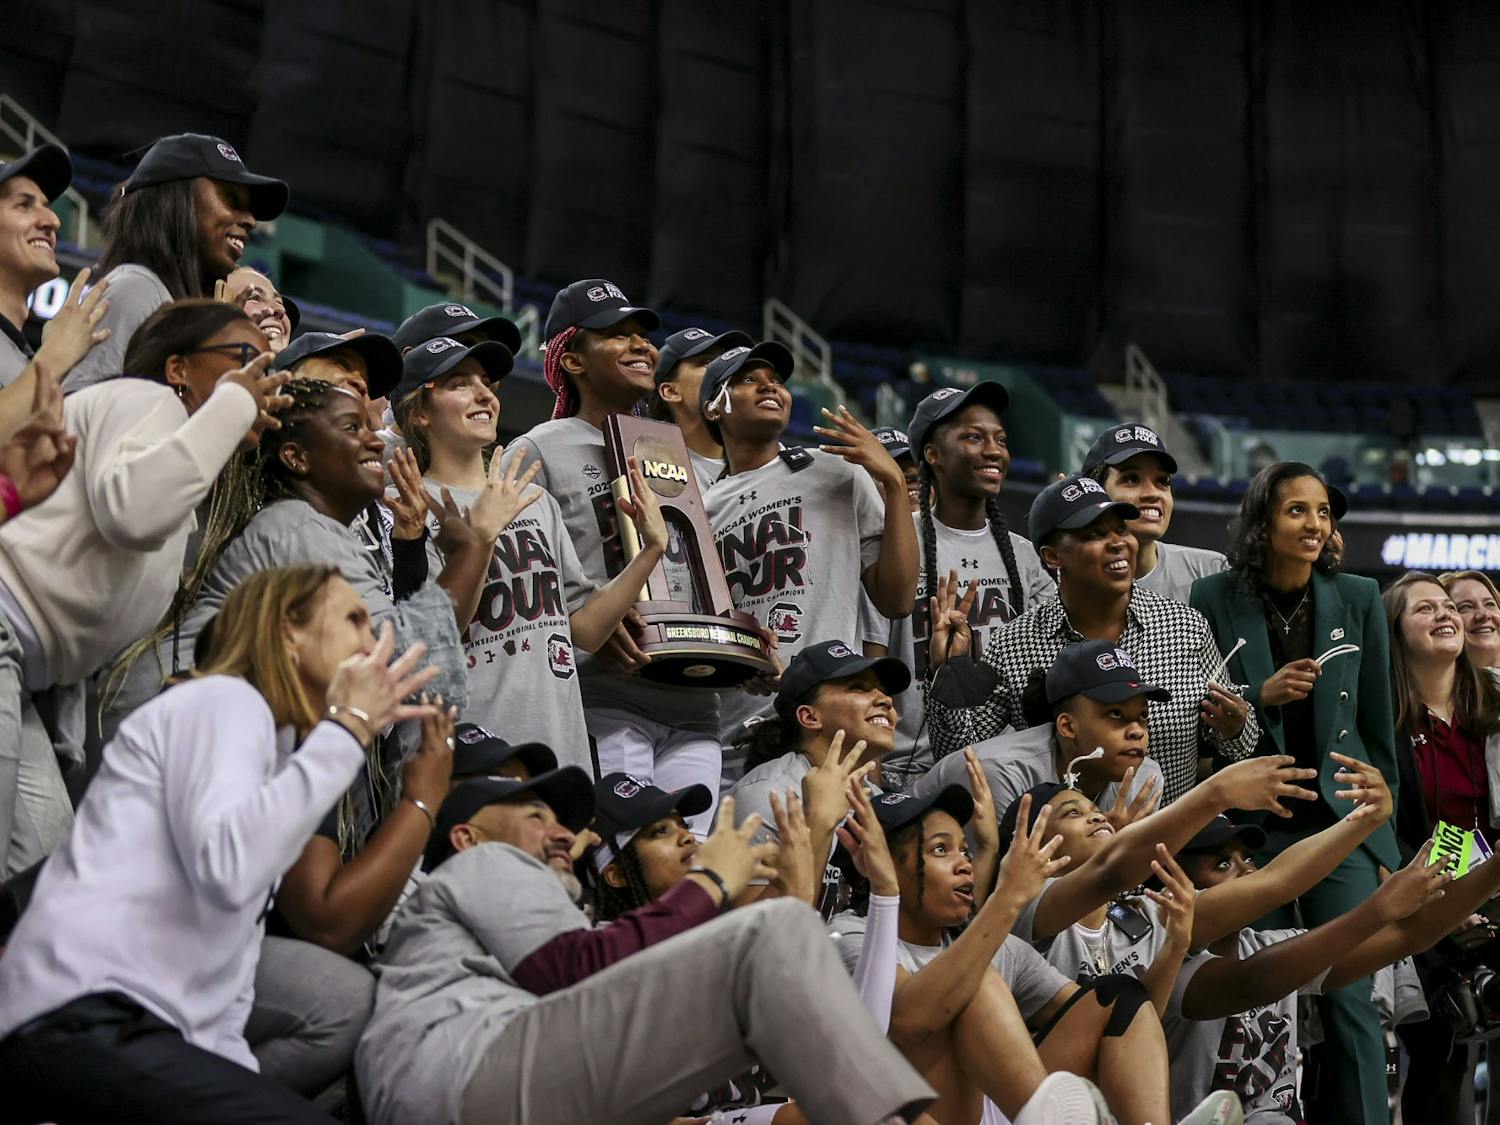 The South Carolina women's basketball team celebrates after winning 80-50 against Creighton in the Elite Eight. The win propelled the team to the Final Four.&nbsp;